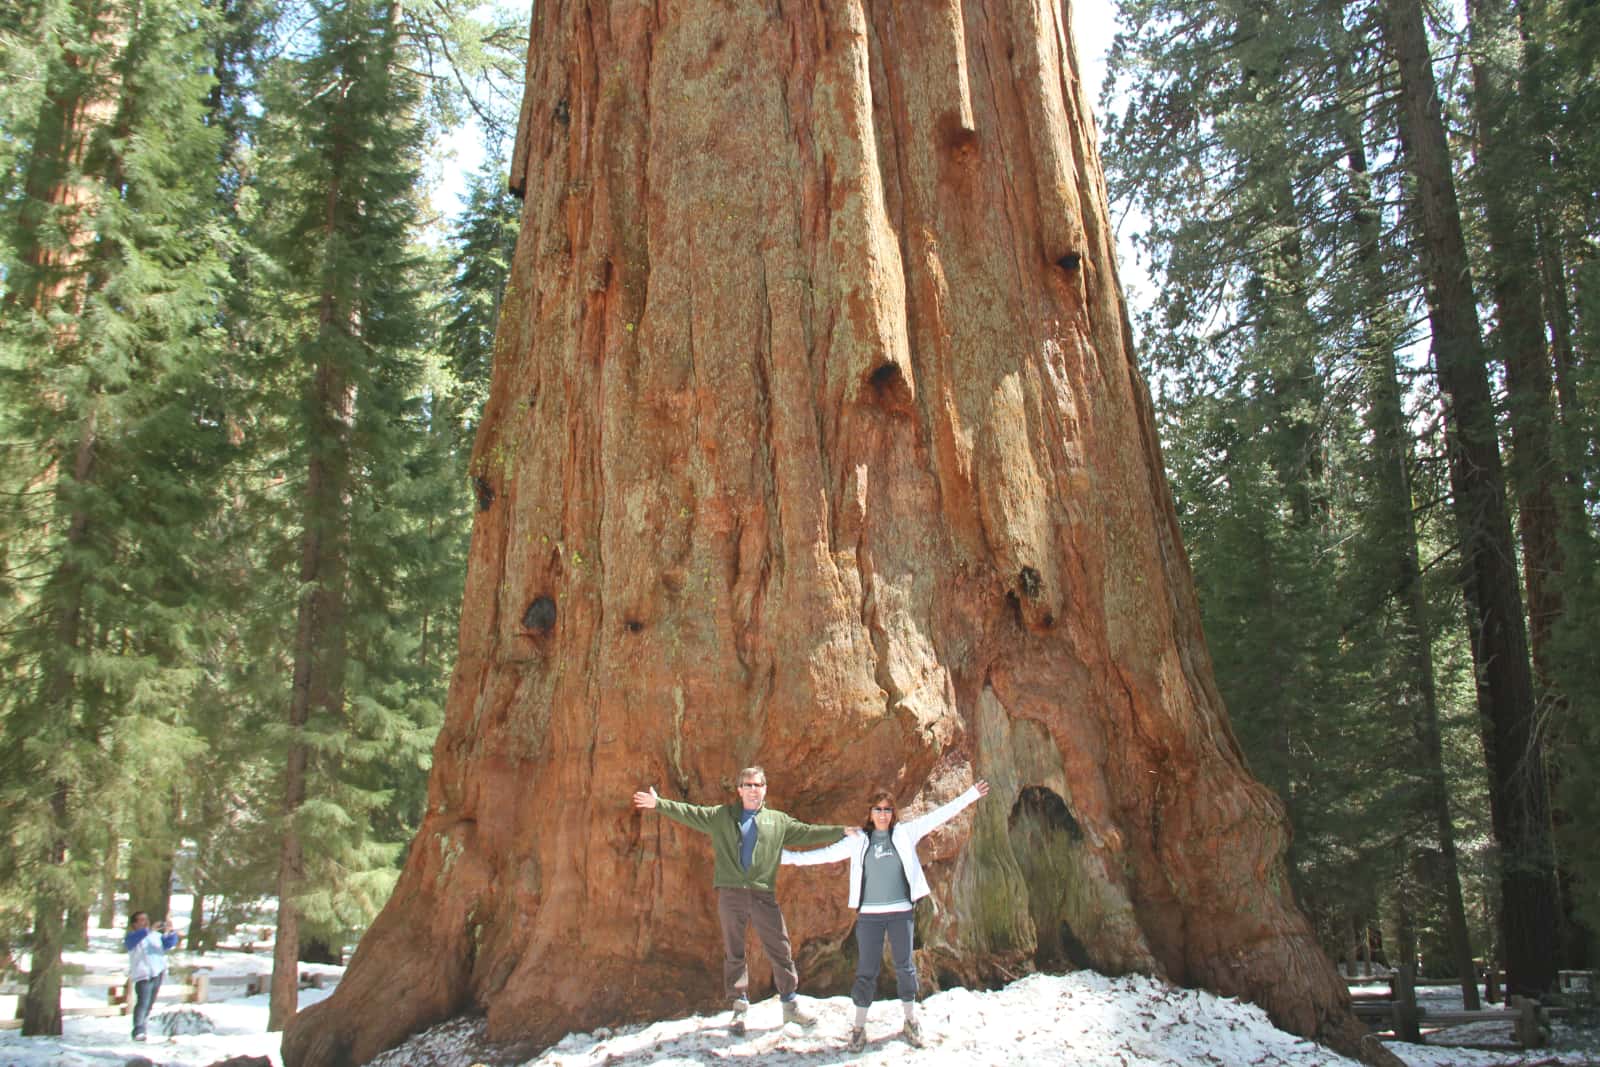 Man and woman standing in front of very large tree